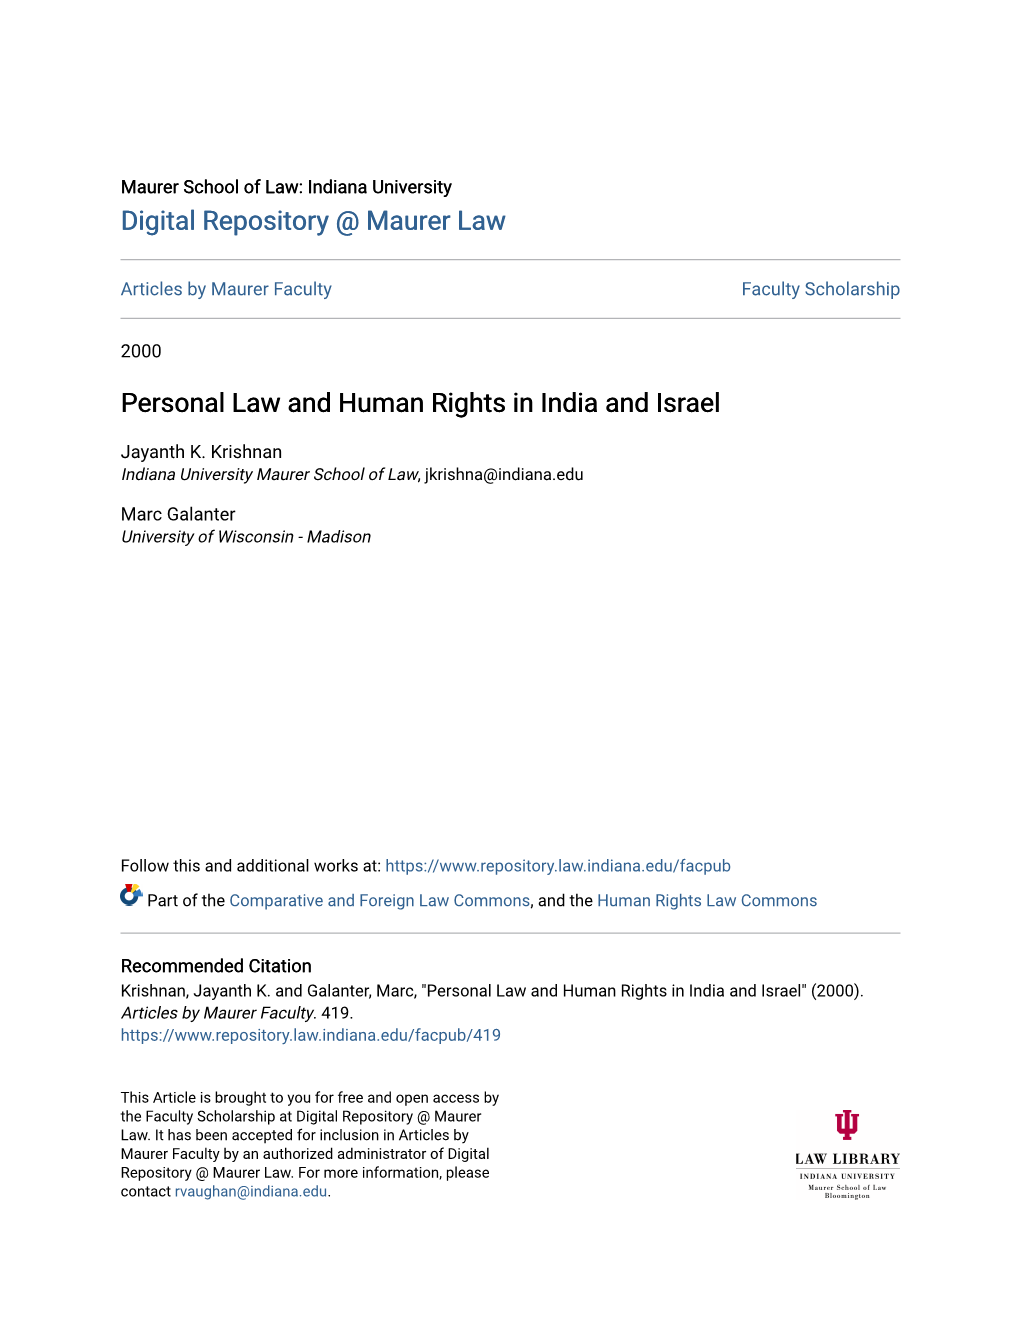 Personal Law and Human Rights in India and Israel